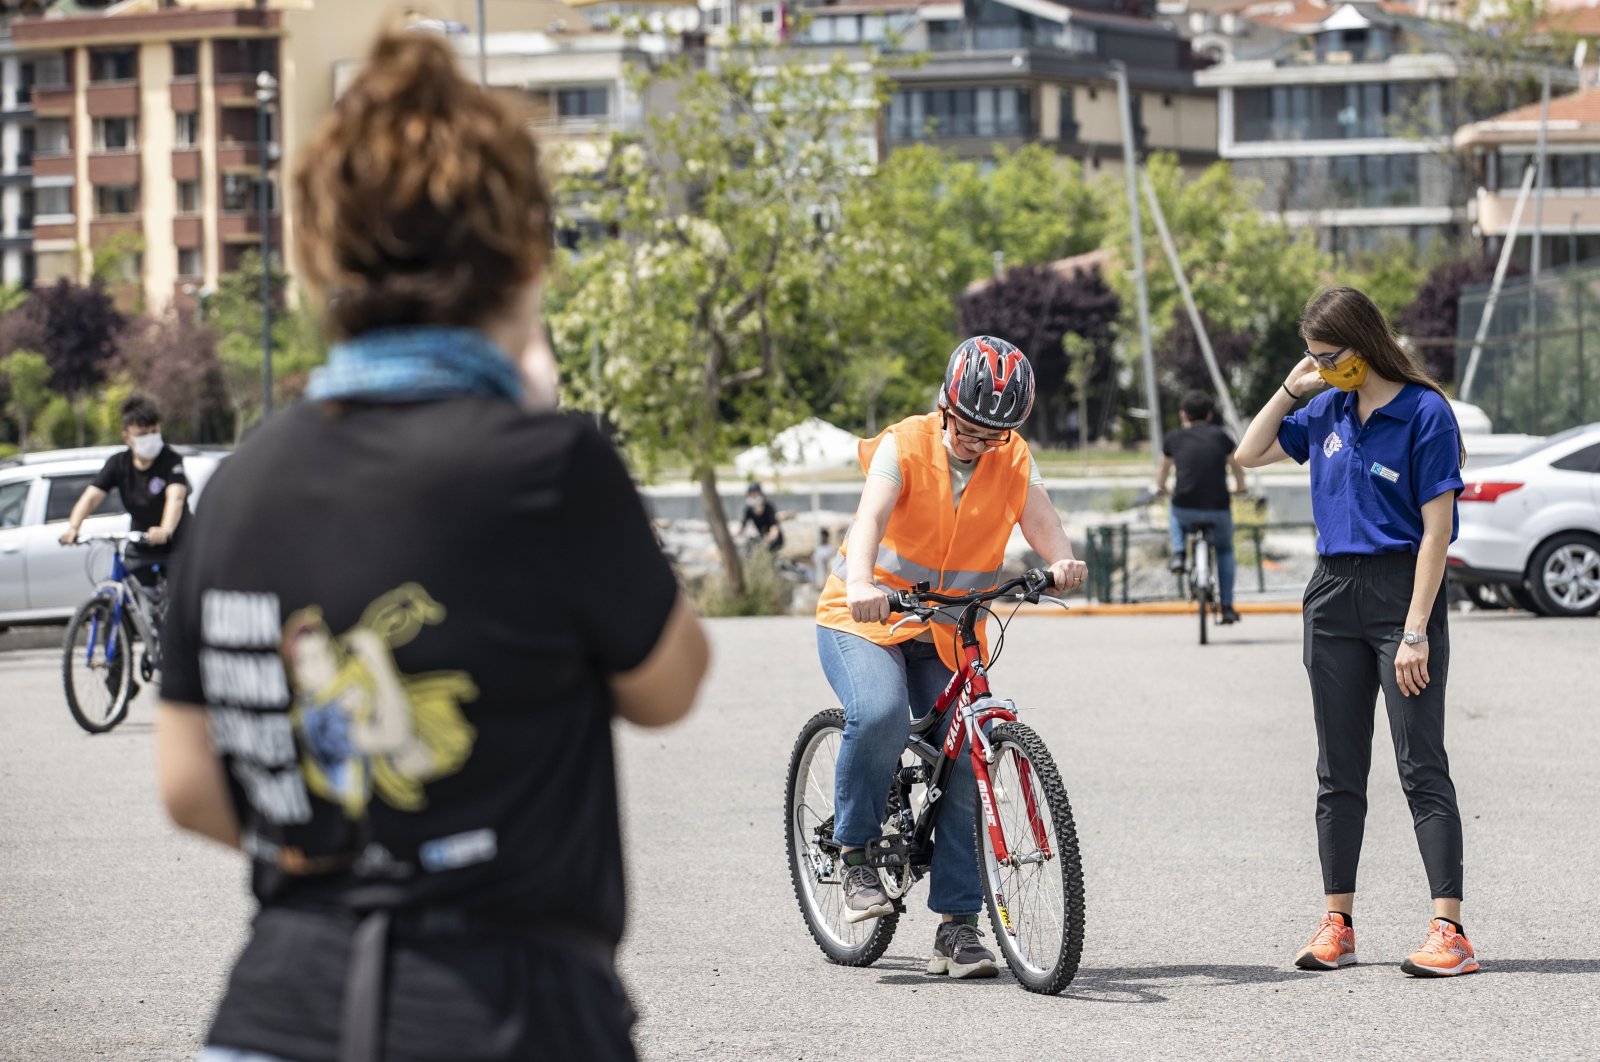 The group's members teach a woman how to ride, in Istanbul, Turkey, June 3, 2021. (AA PHOTO)